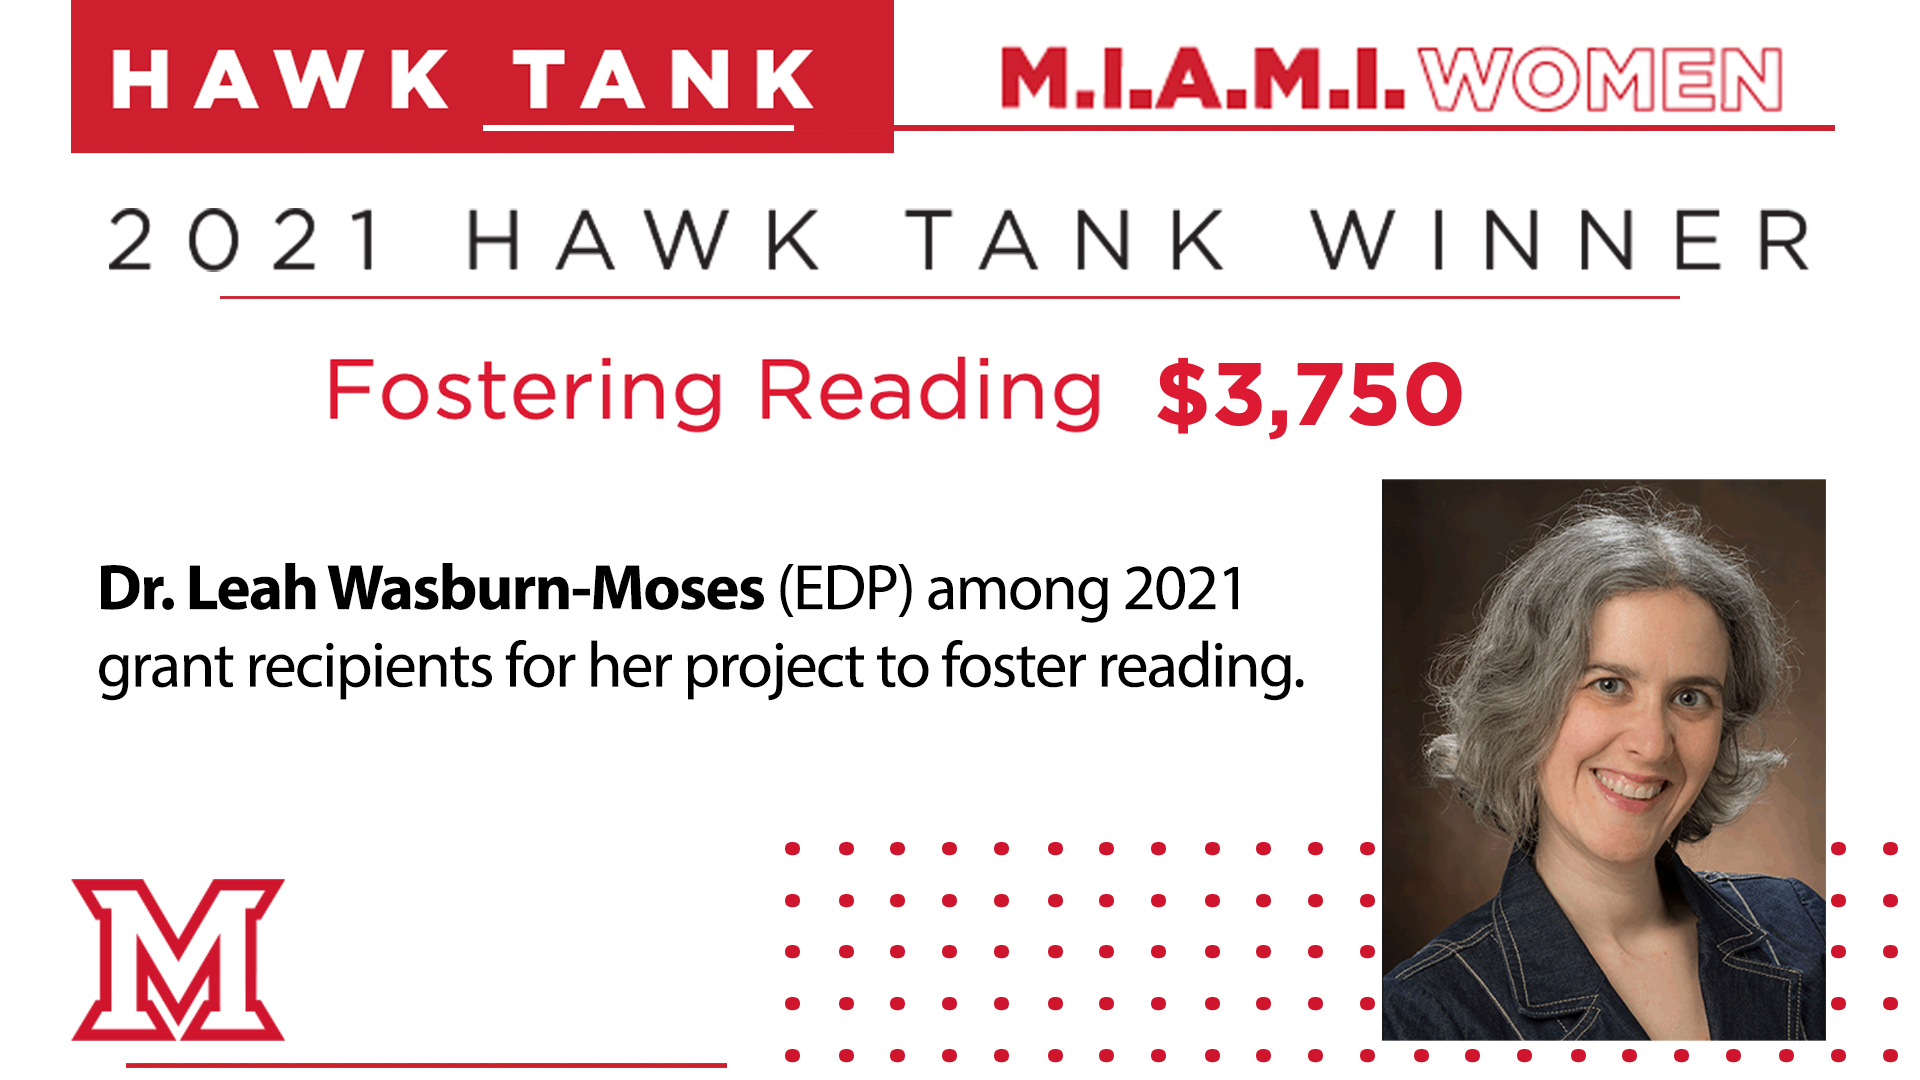 Dr. Leah Wasburn-Moses (EDP) among 2021 grant recipients for her project to foster reading.